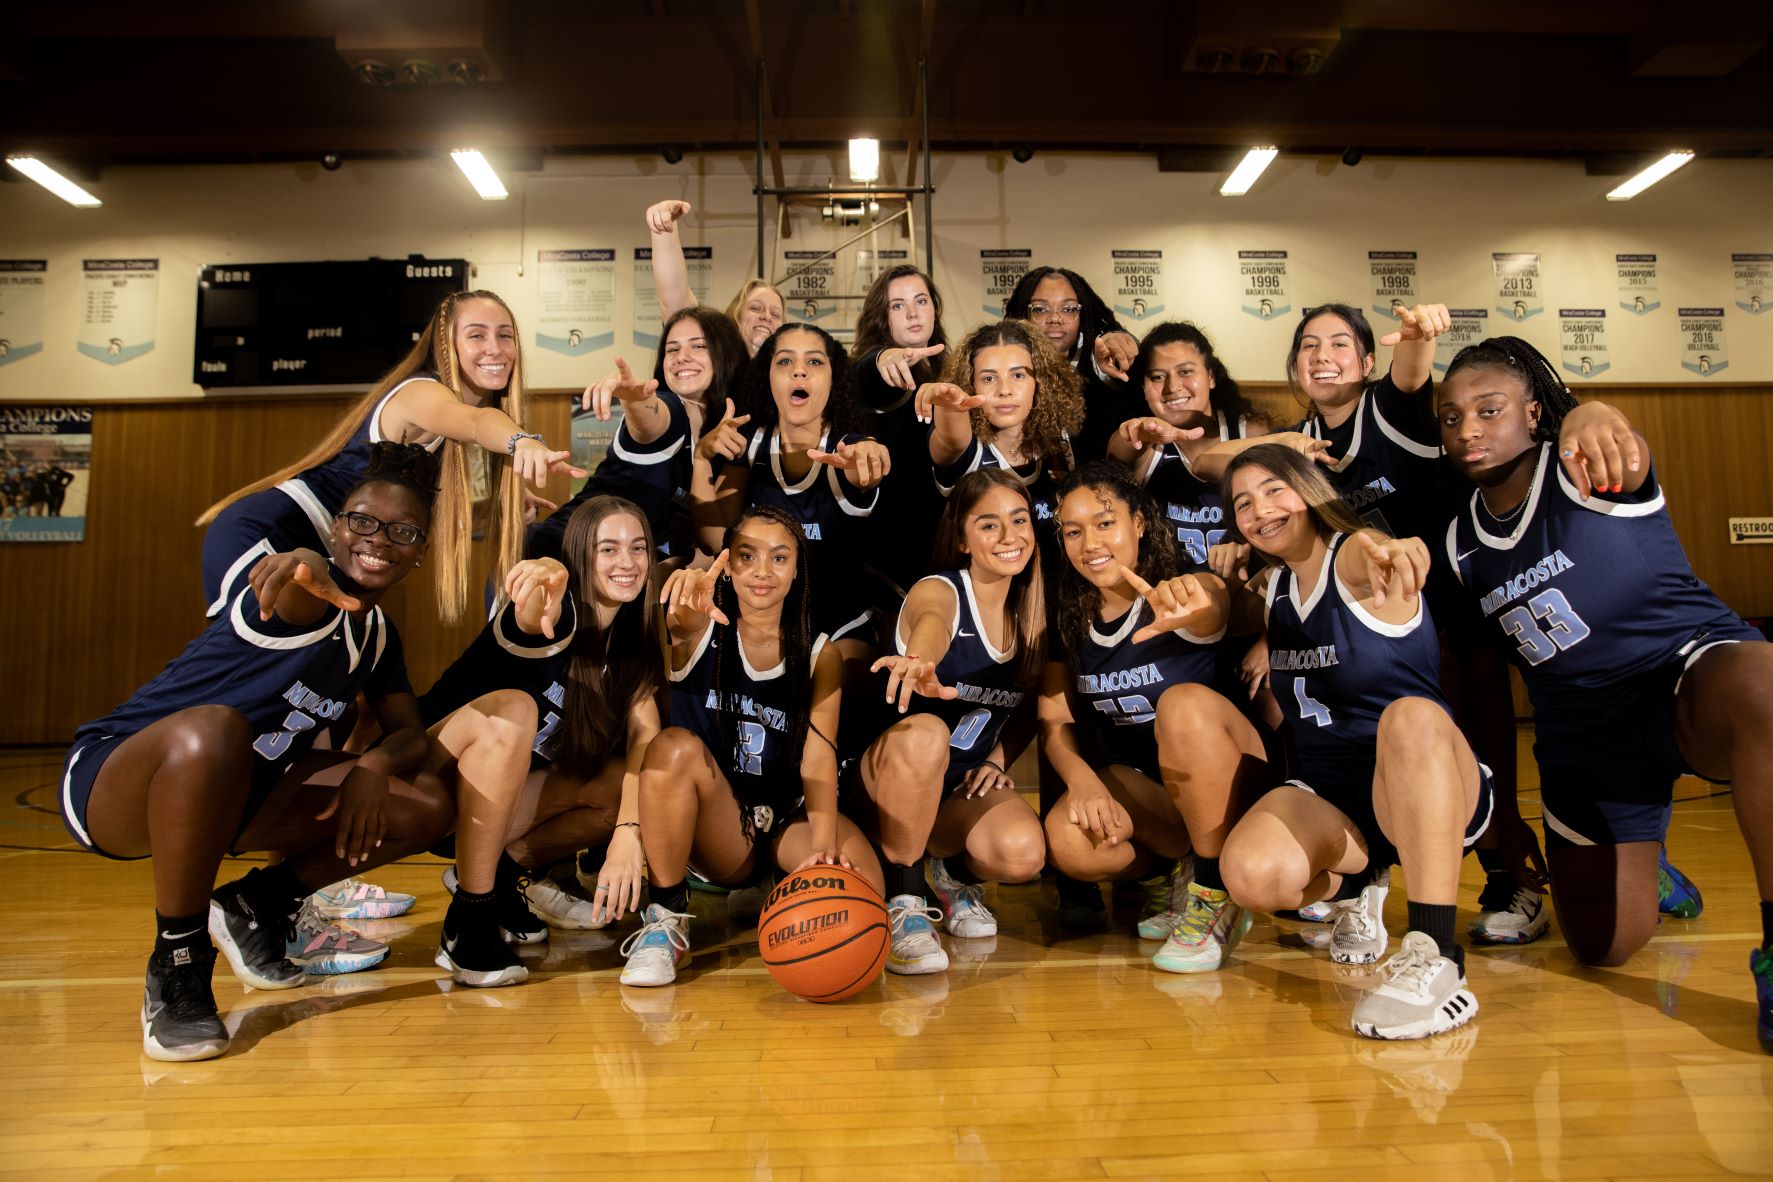 Women's Basketball team picture.